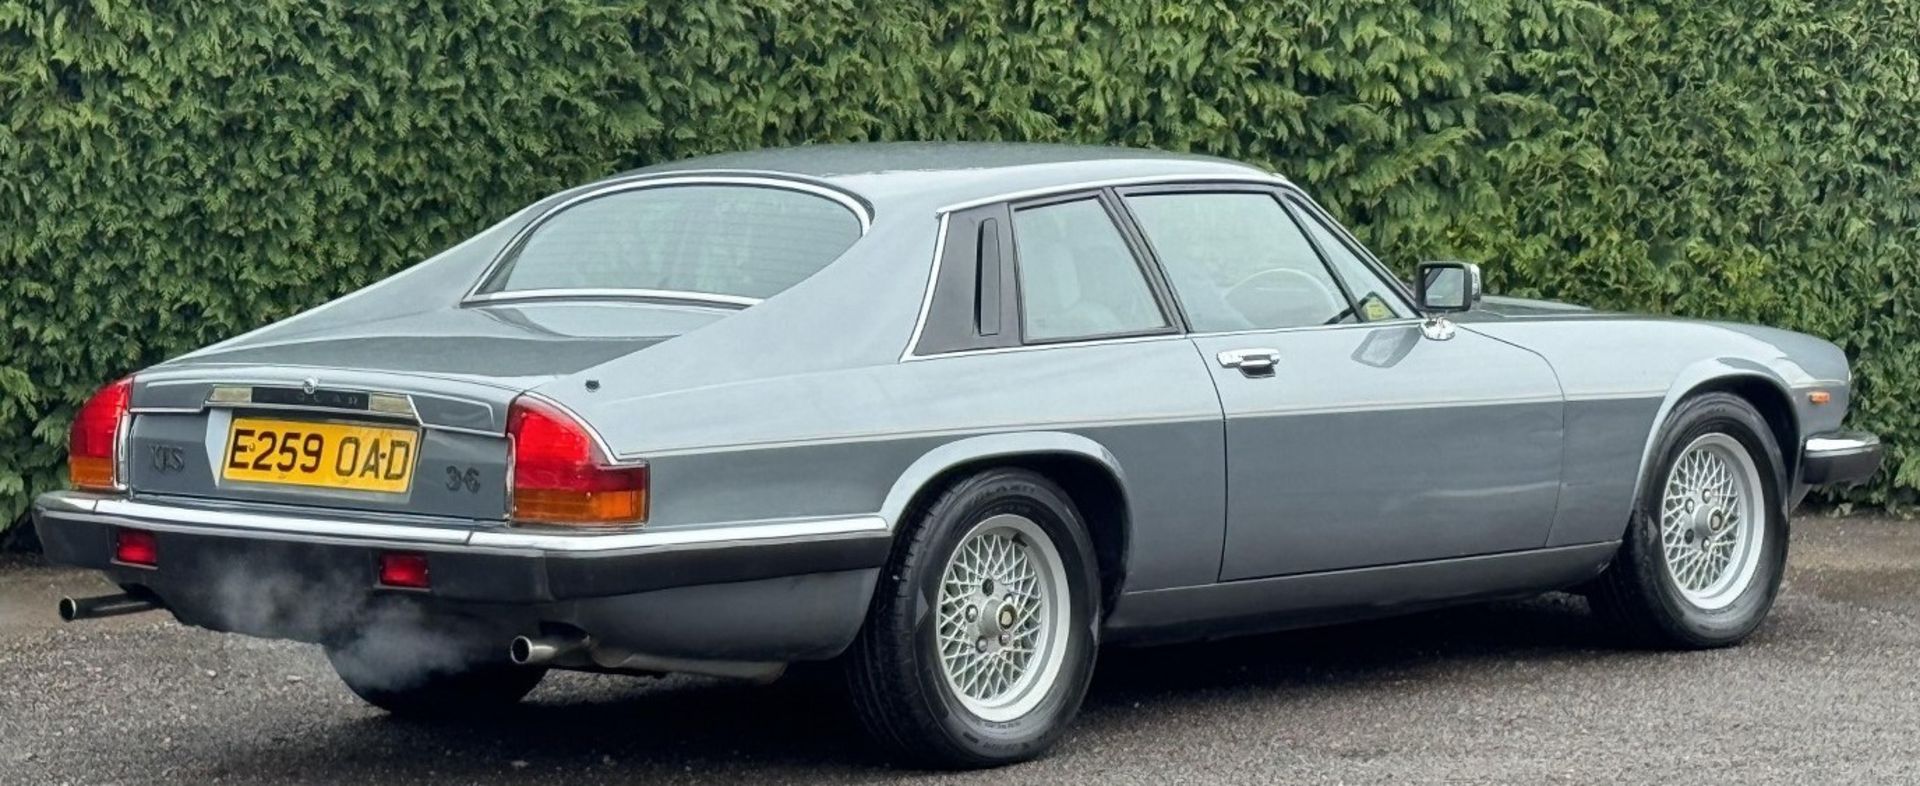 1988 Jaguar XJ-S 3.6 Coupe Registration number E259 OAD Metallic light blue with a half leather - Image 4 of 24